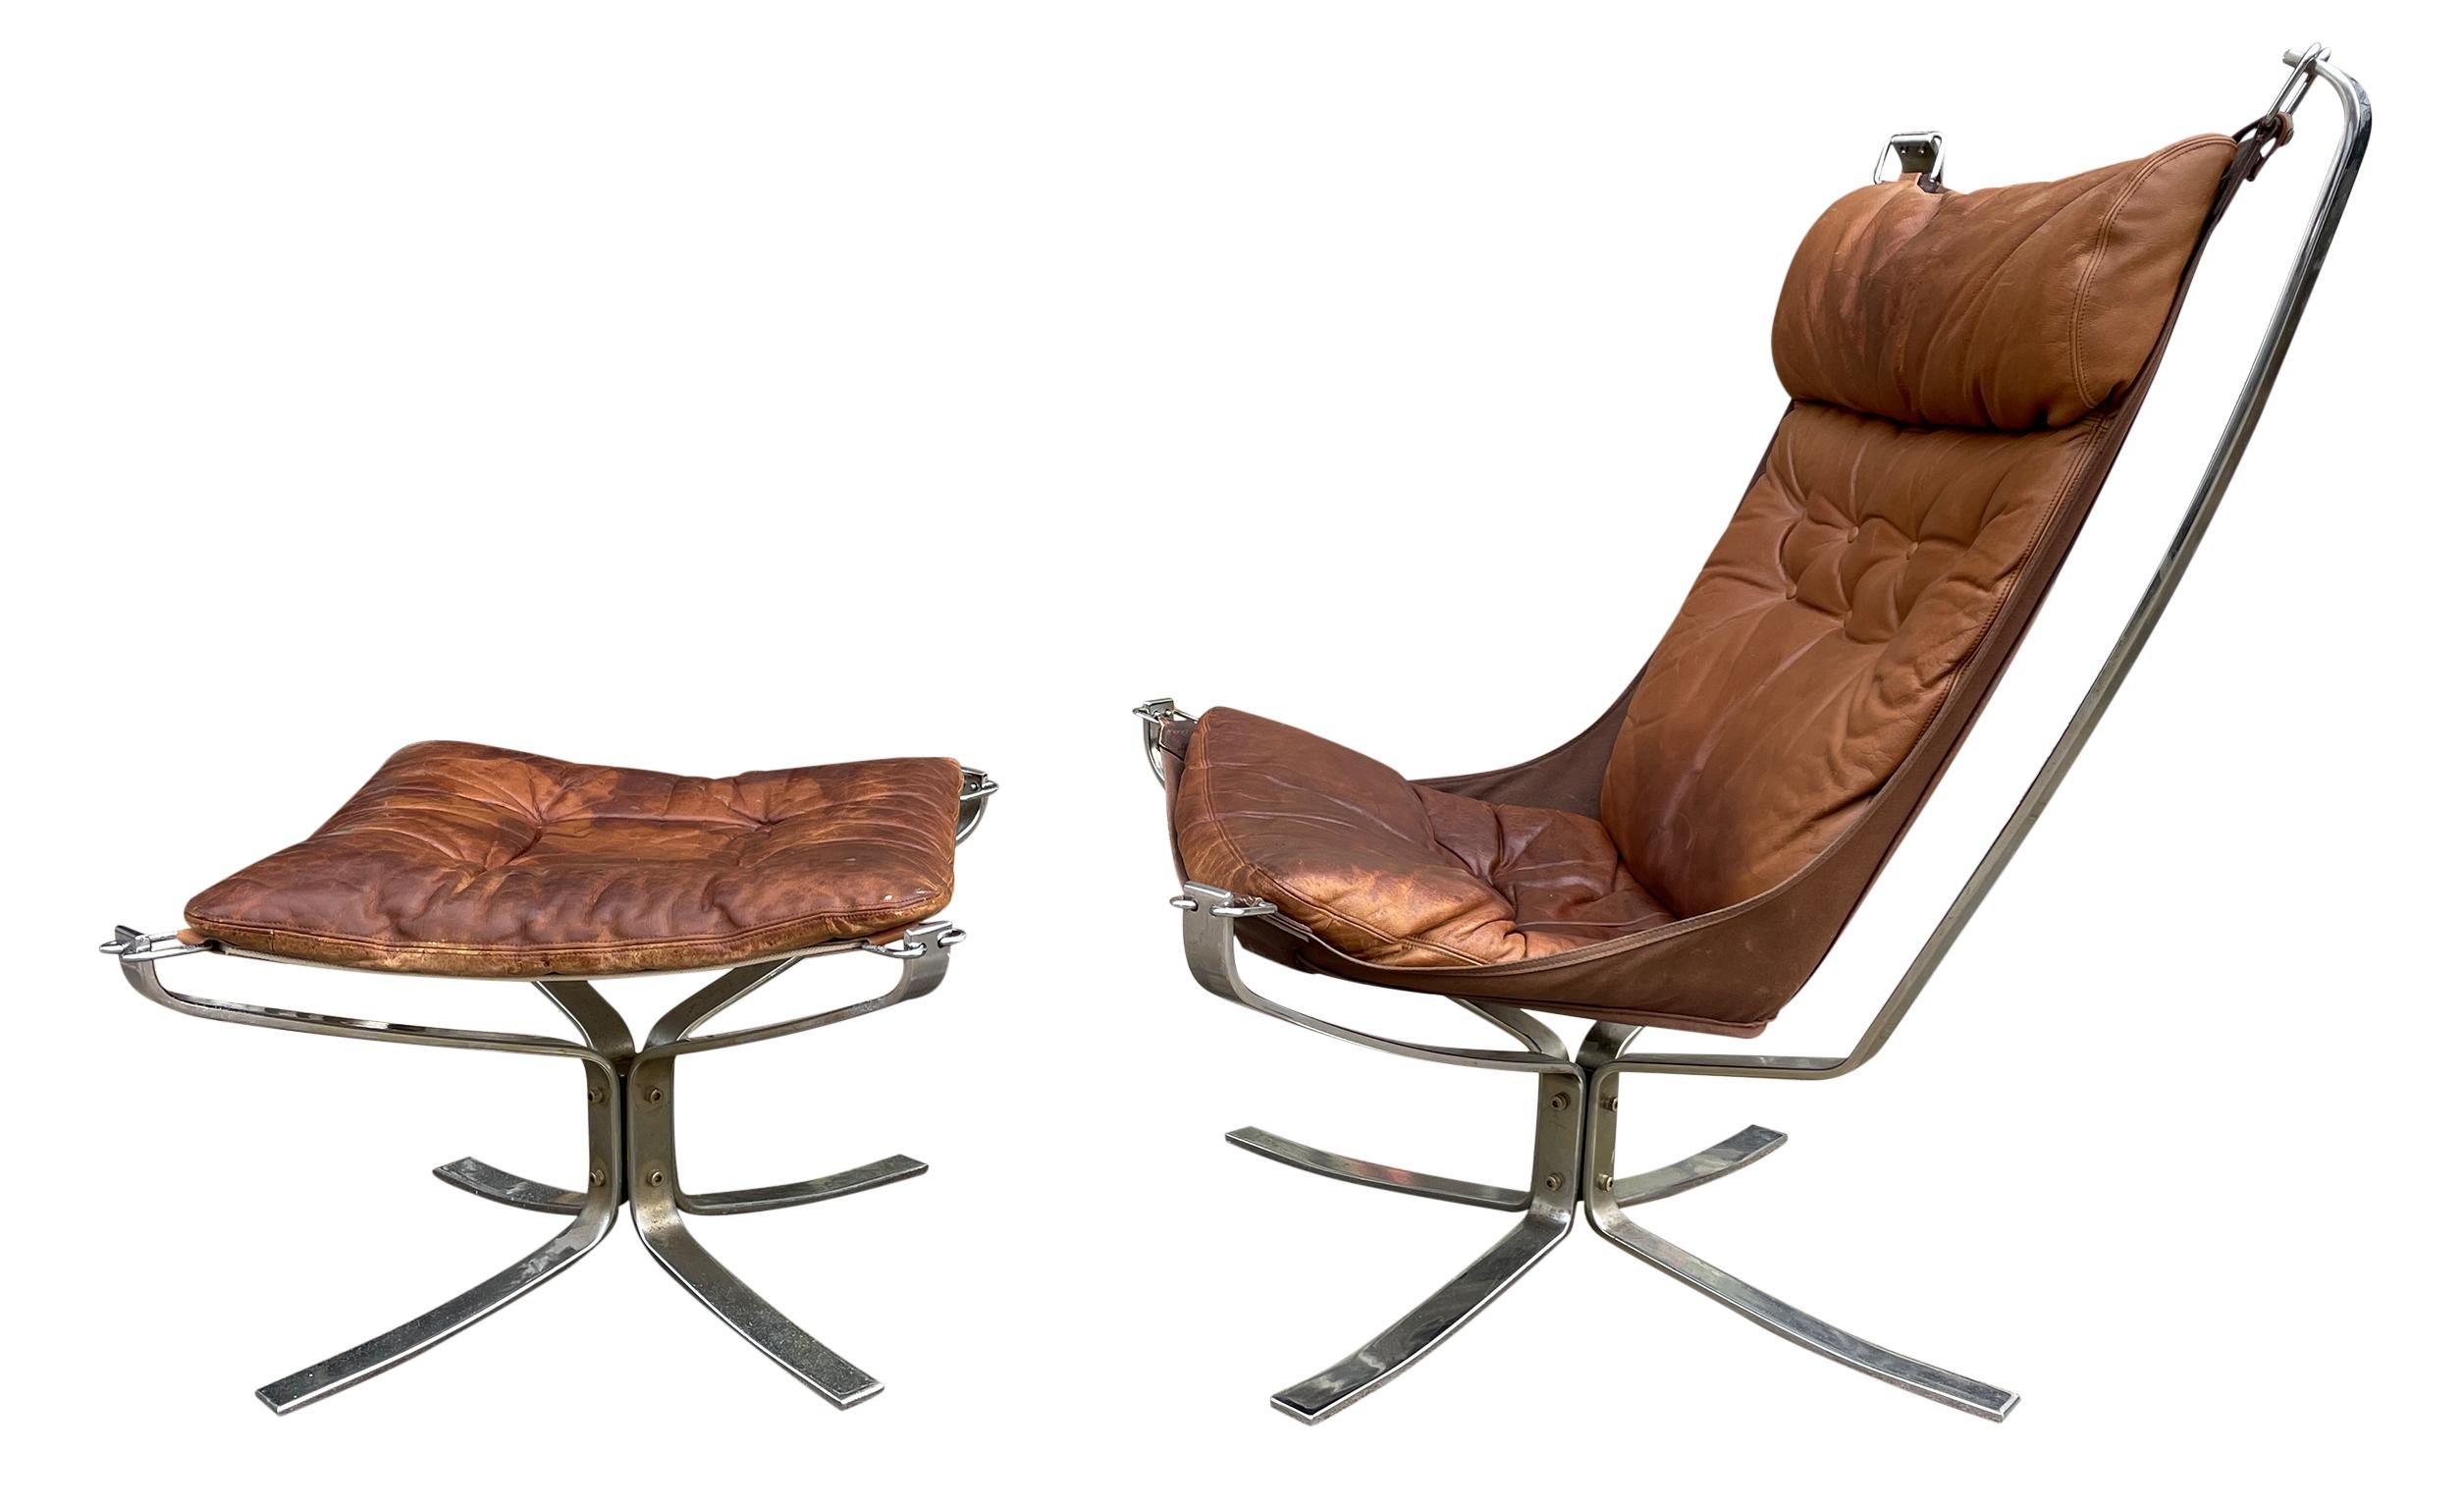 Midcentury Leather chrome lounge chair and ottoman by Sigurd Ressell. Falcon Chair and ottoman. Leather is distressed and broken in - Shows signs of wear. All straps are in good shape and canvas is tight. Canvas was replaced on the ottoman. Chair